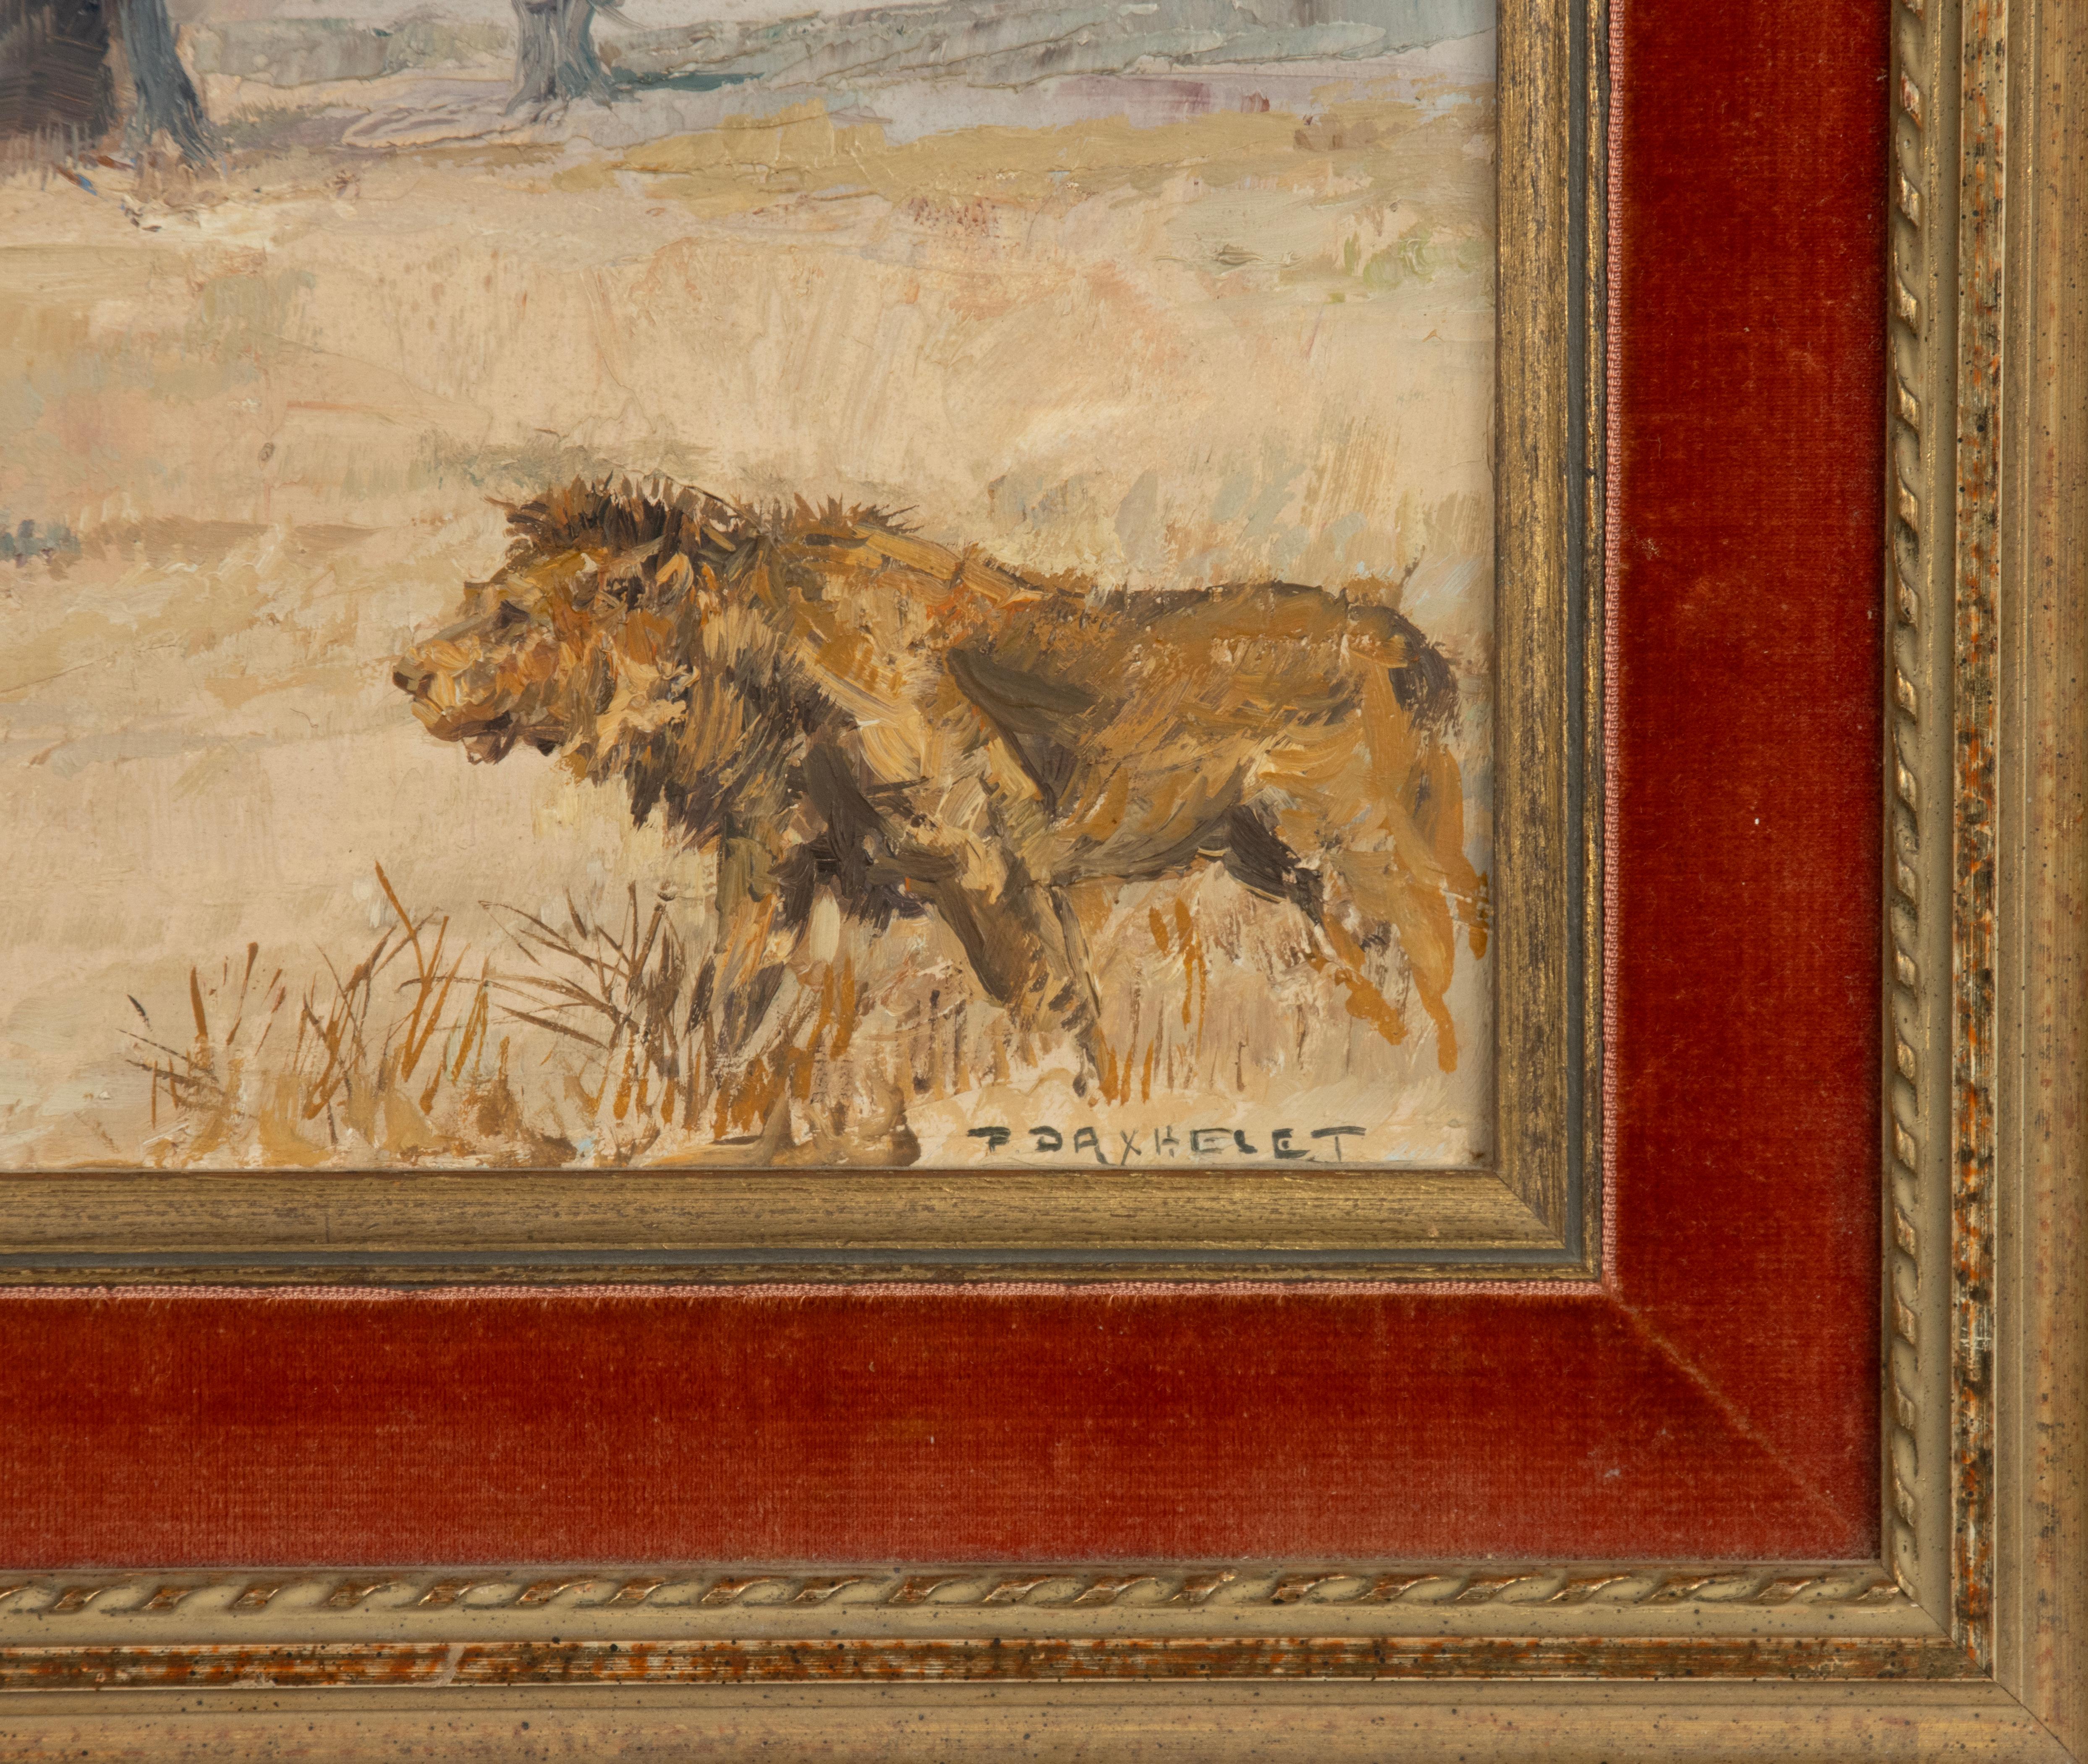 Hand-Painted Oil Painting - Lions in a Savannah Landscape - Paul Daxhelet For Sale